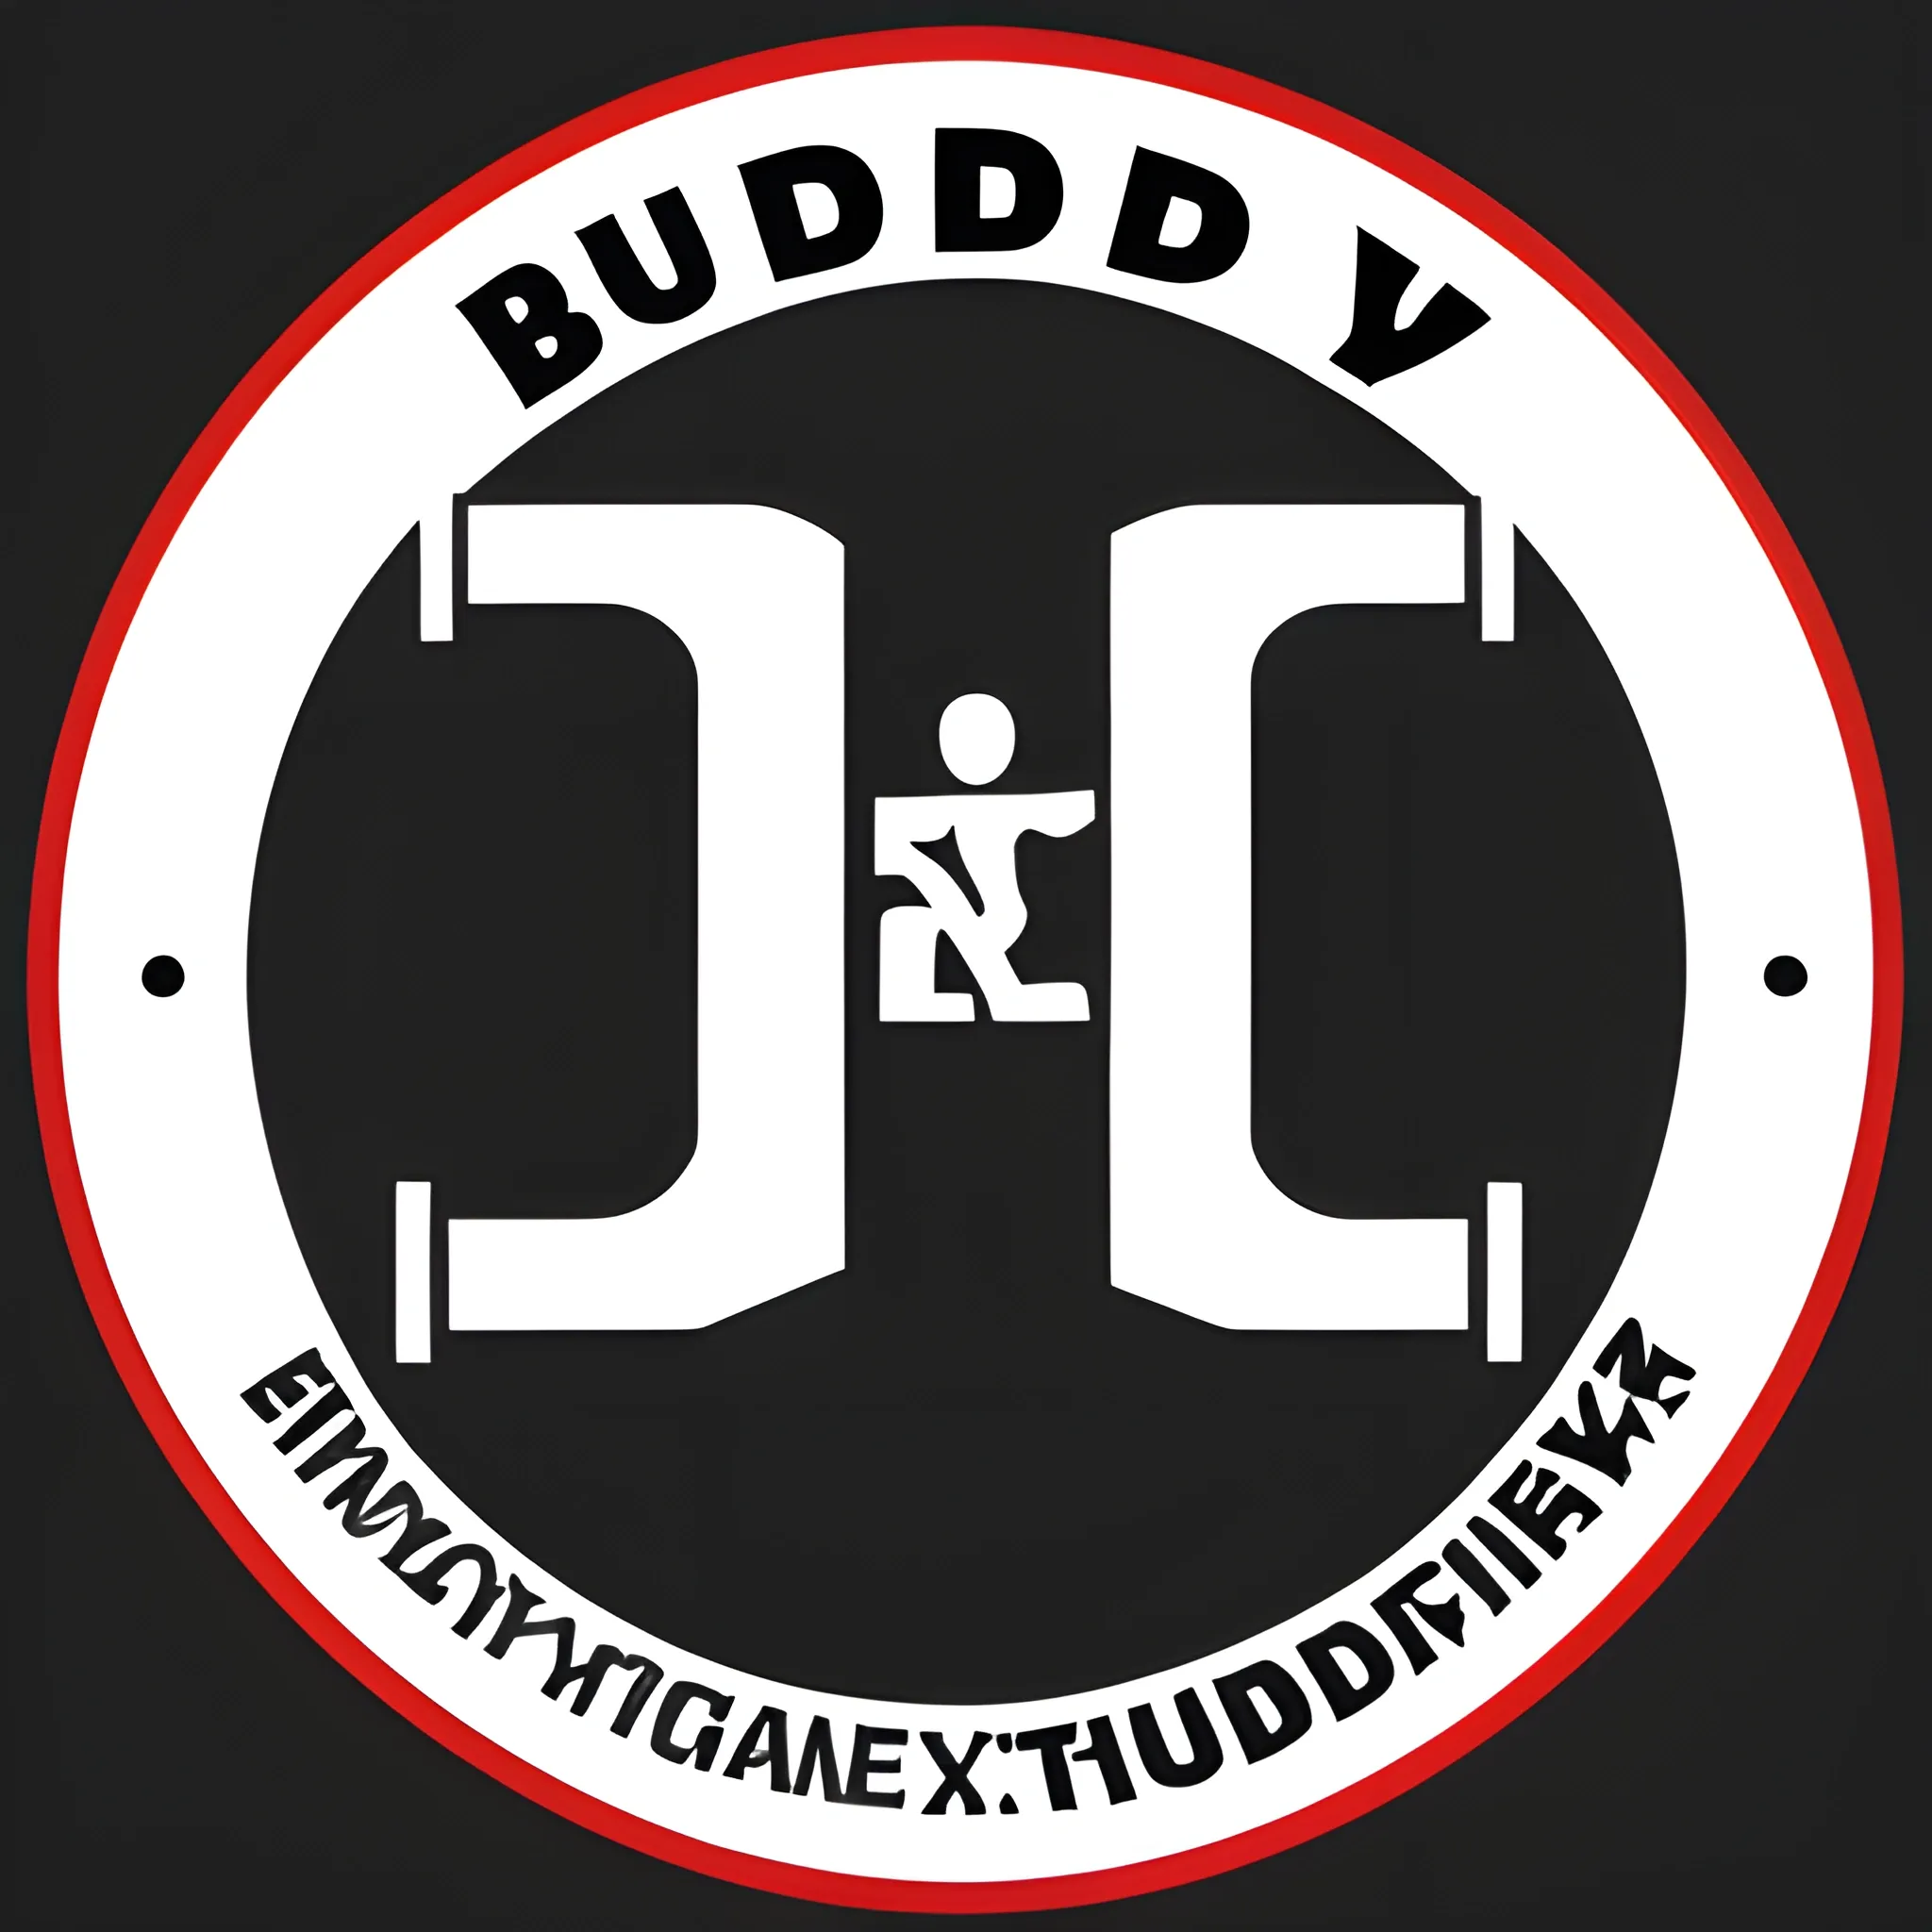 Brand Logo about Bodybuilding and the word: "BodyBuddy"